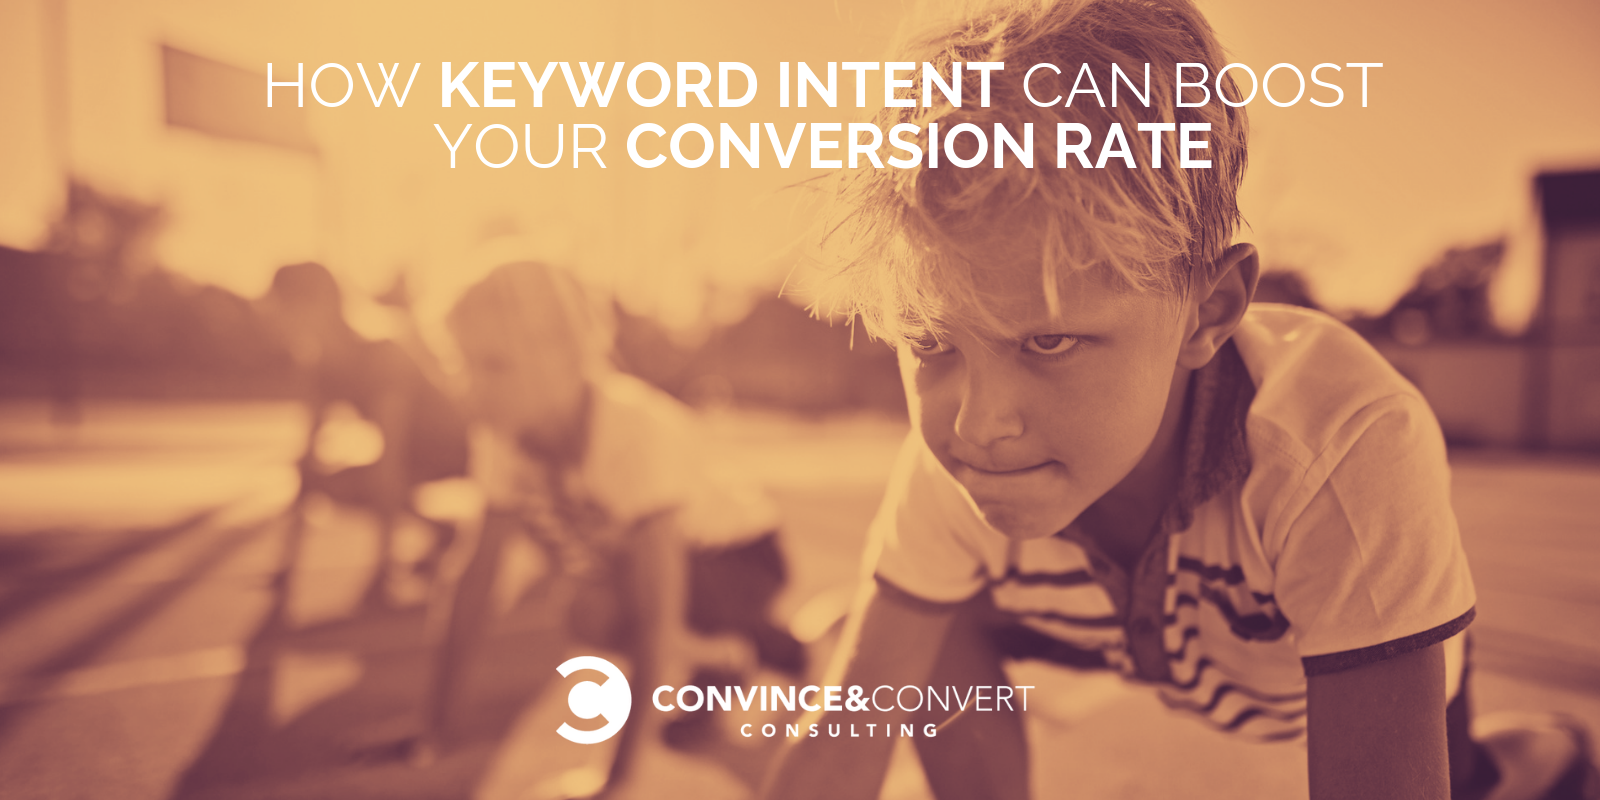  What is keyword intent?